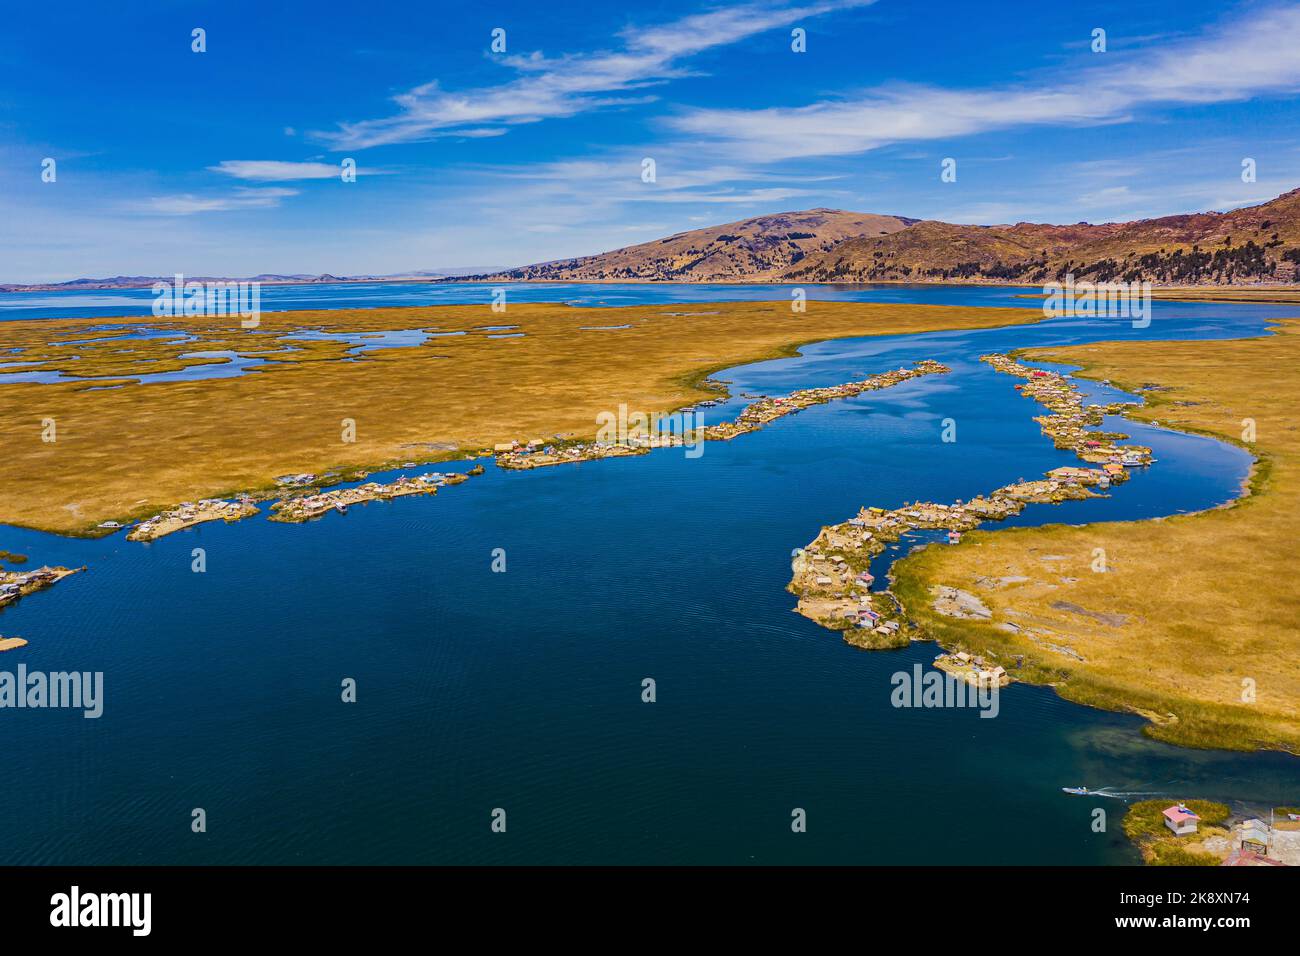 Aerial view of the Uros Straw Floating Islands on Lake Titicaca near Puno, Peru. Stock Photo